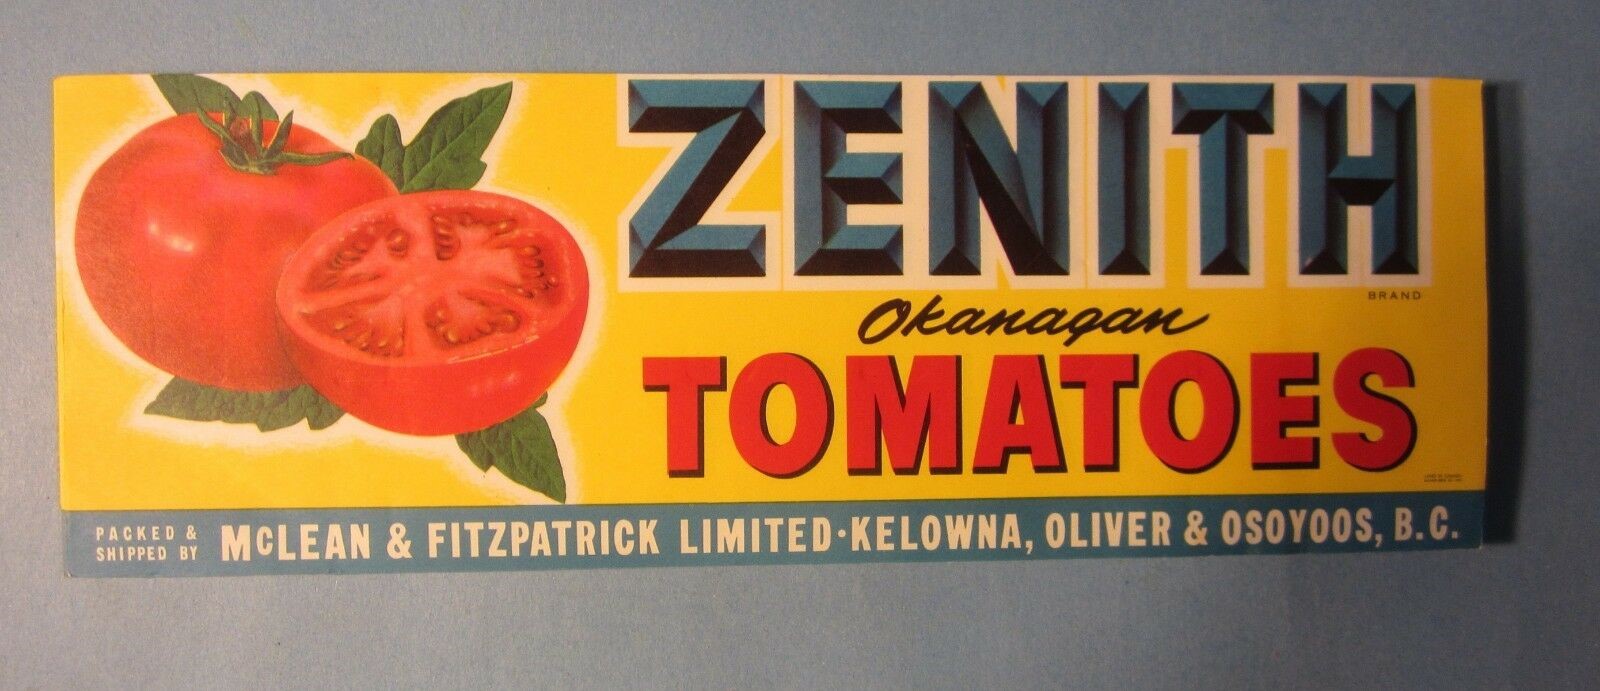  Lot of 100 Old Vintage - Zenith TOMATOES - Lab...